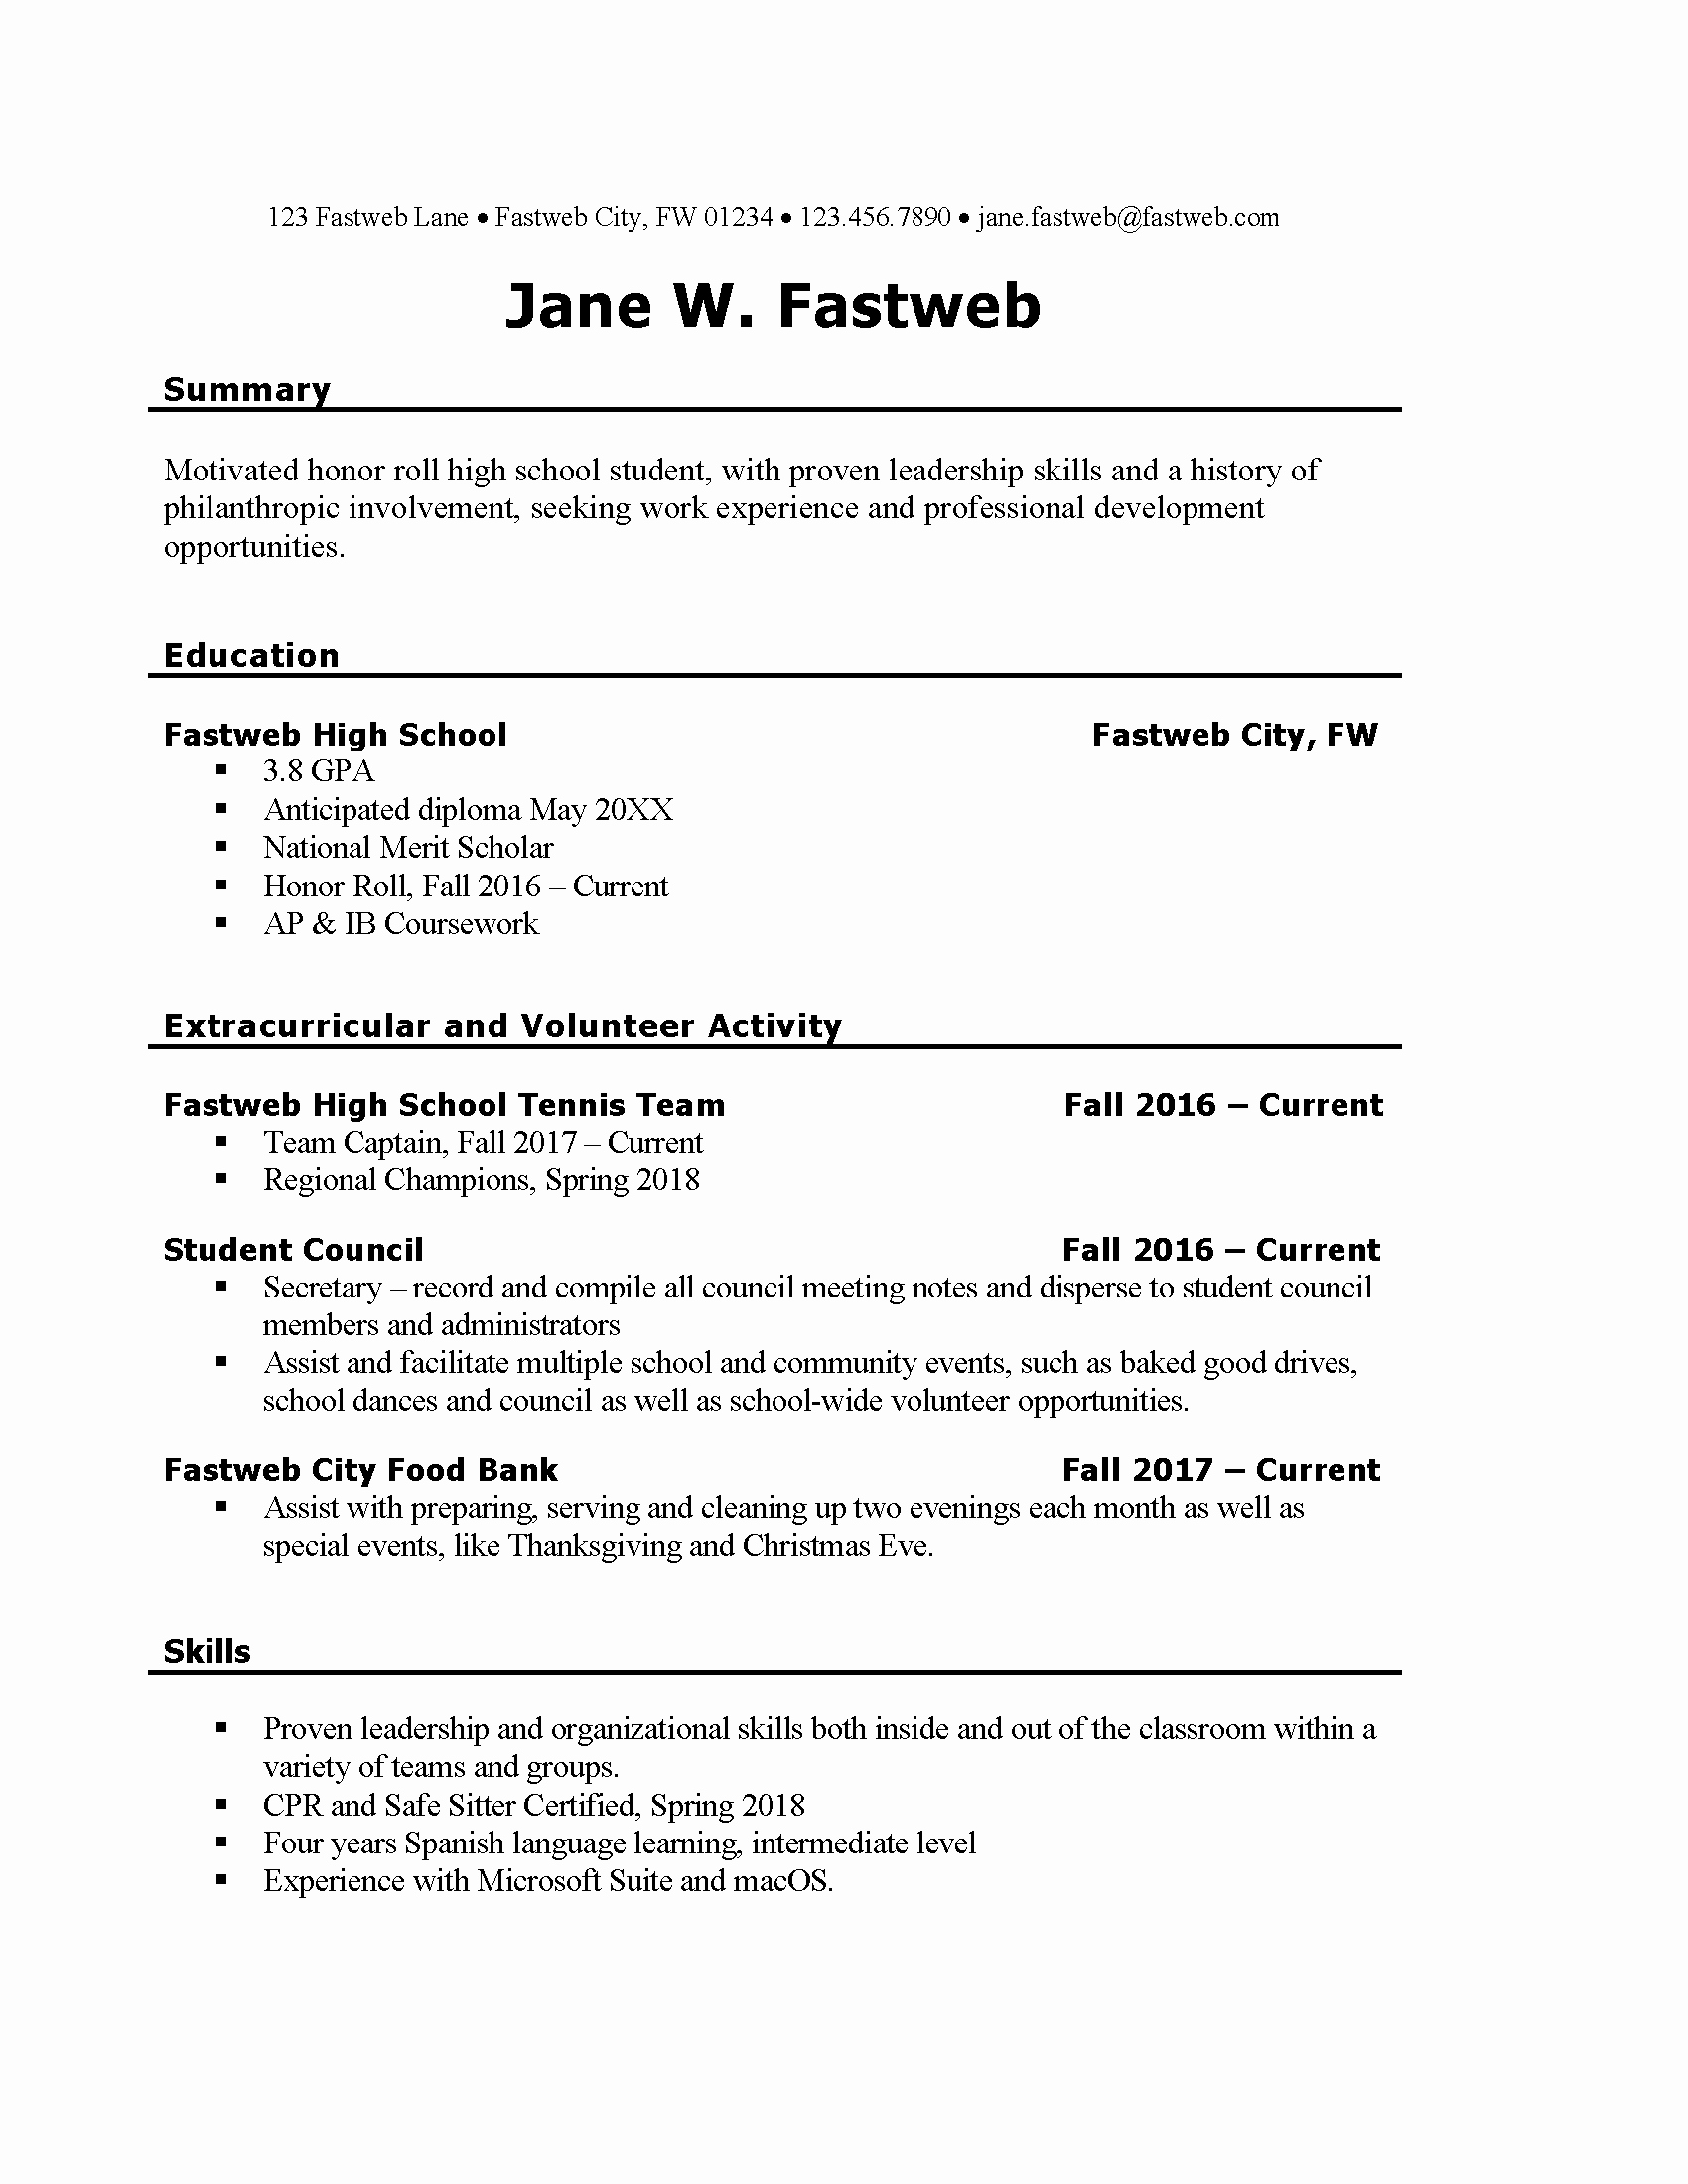 Resume for First Job Examples Beautiful First Part Time Job Resume Sample